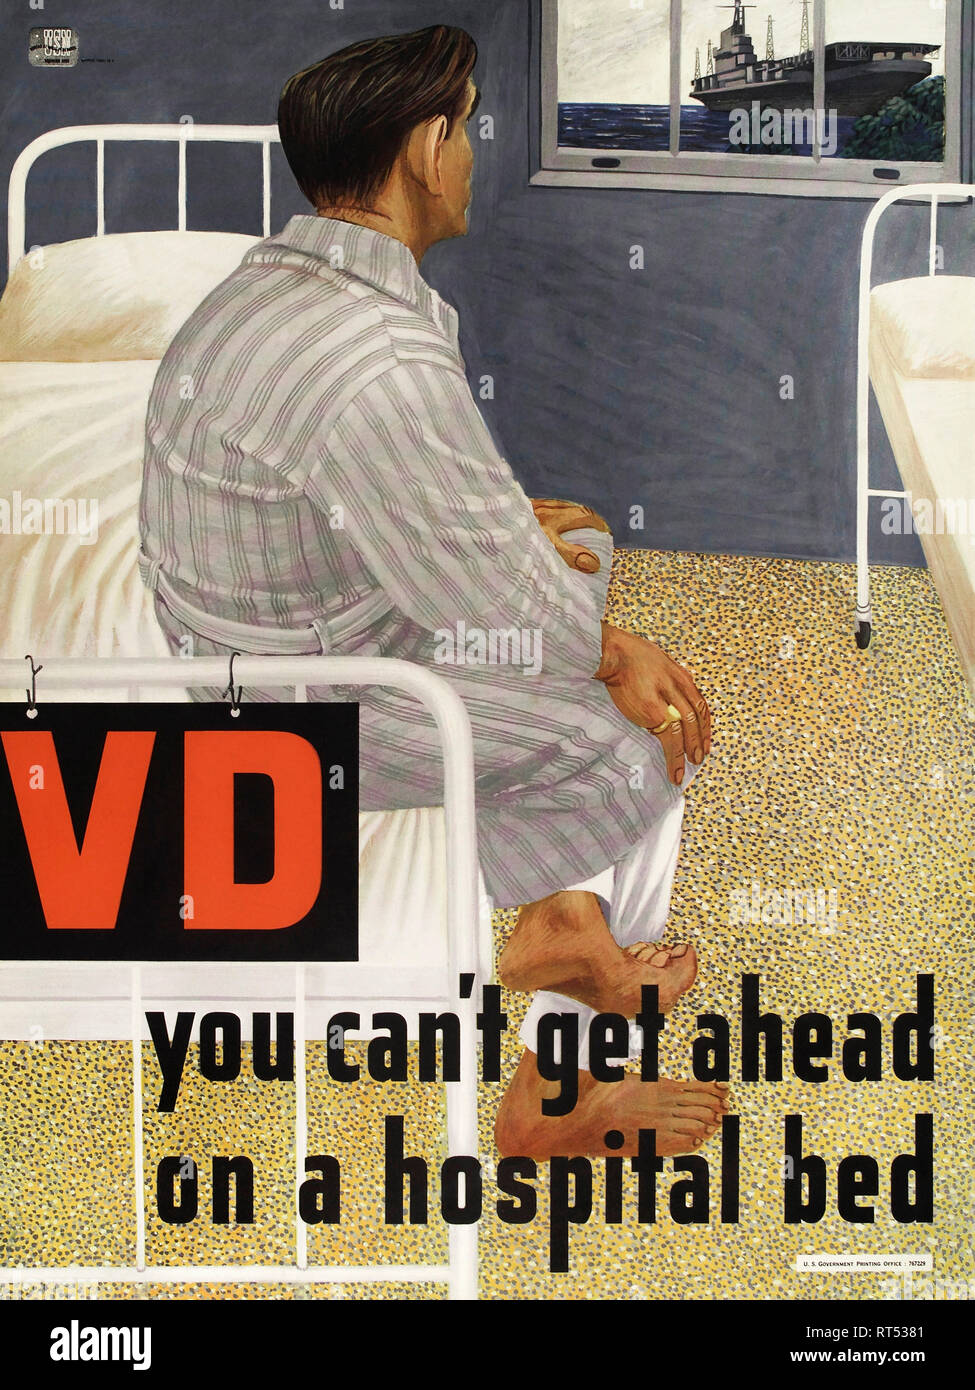 American history poster depicts an American soldier on a hospital bed with venereal disease. Stock Photo